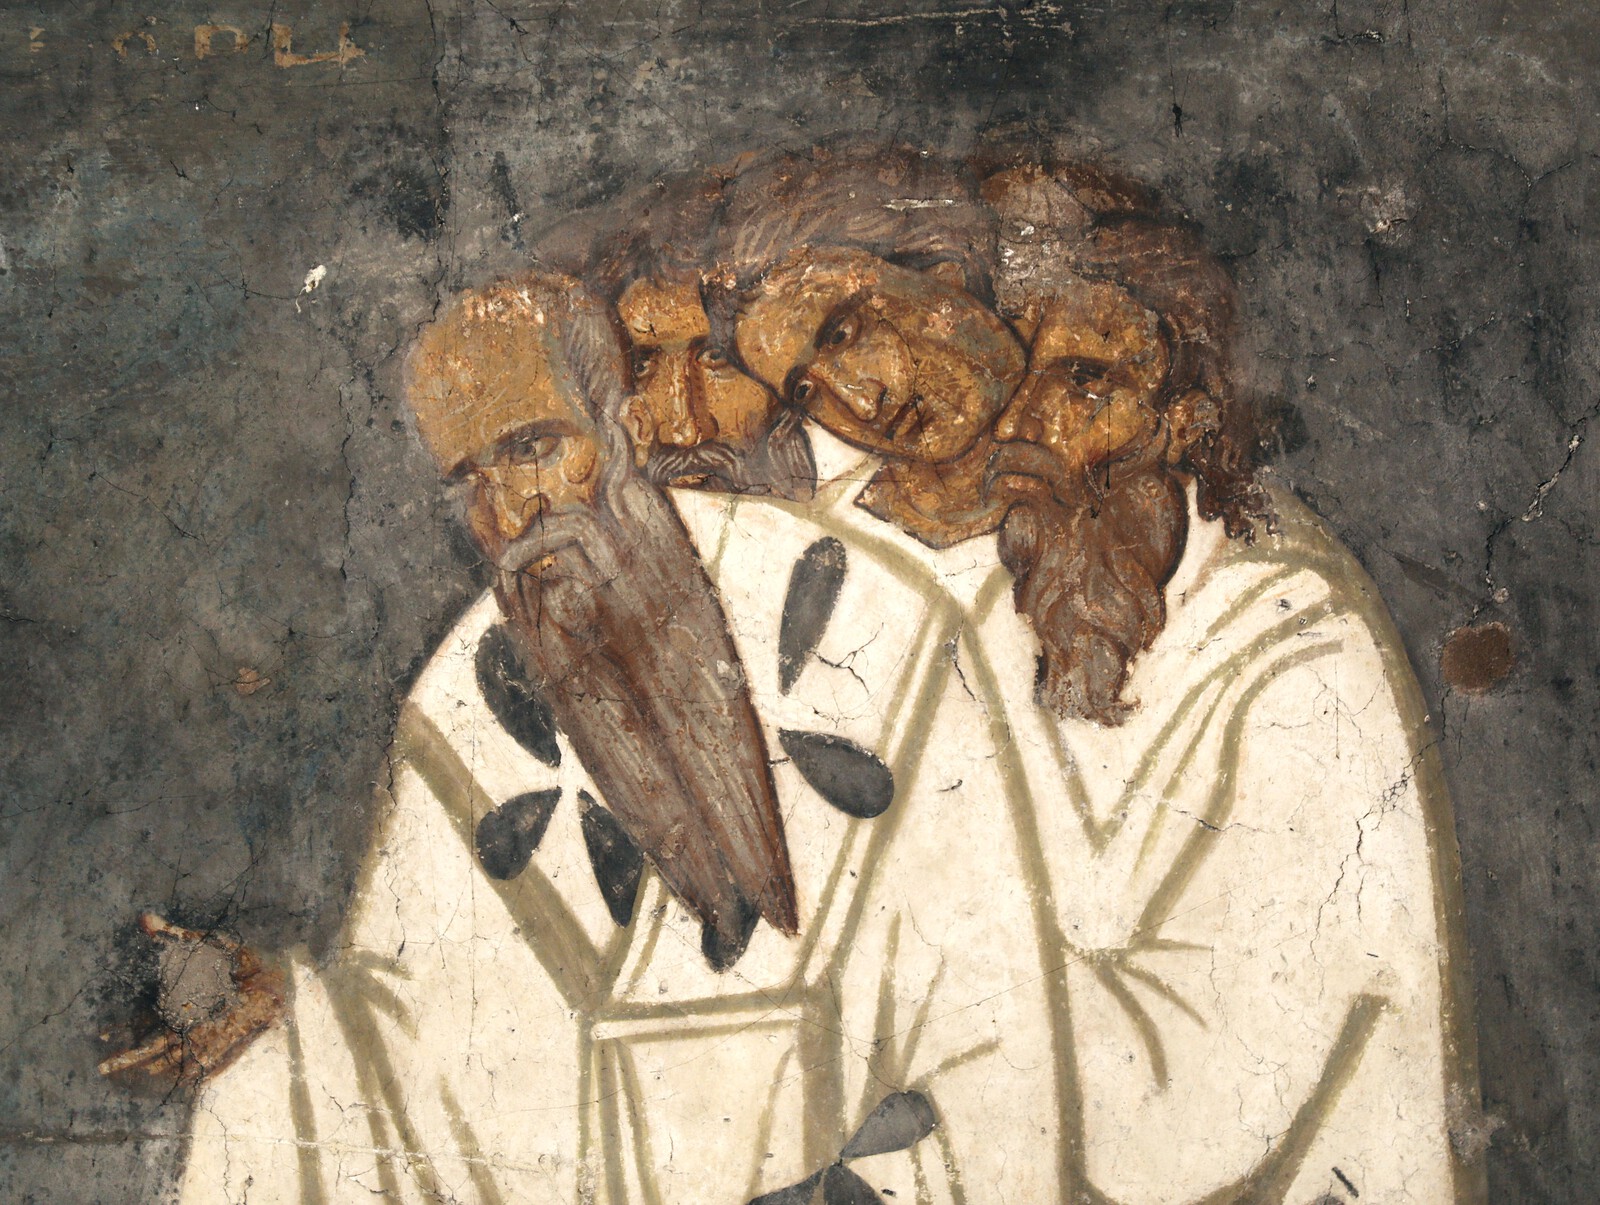 The Forth Ecumenical council, detail